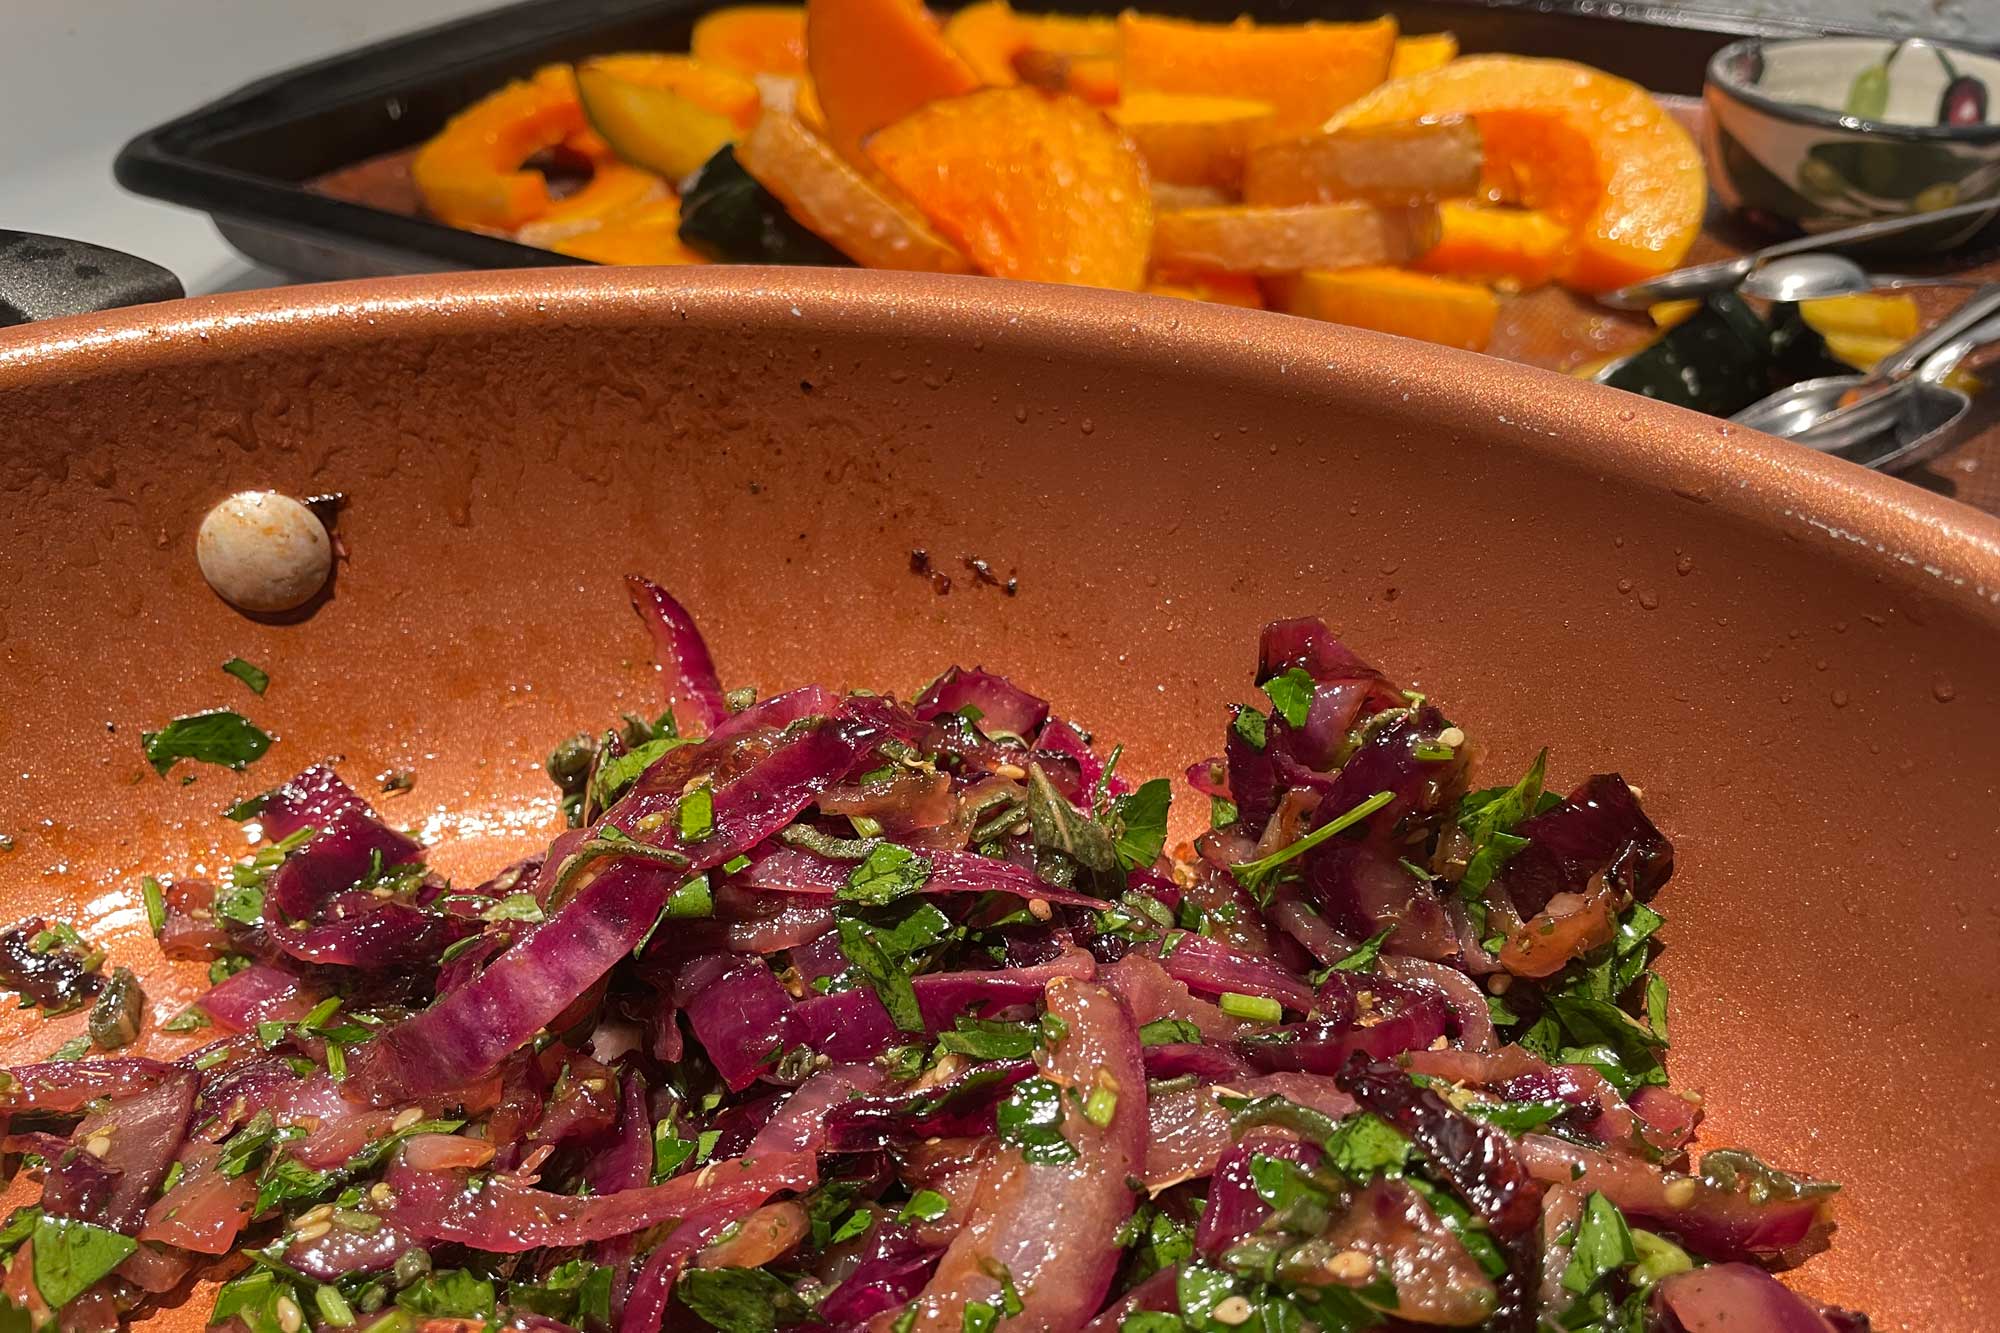 close-up on a pan filled with green herbs and red onions, with orange squash in the background. The vibe is fresh, active, and complete.